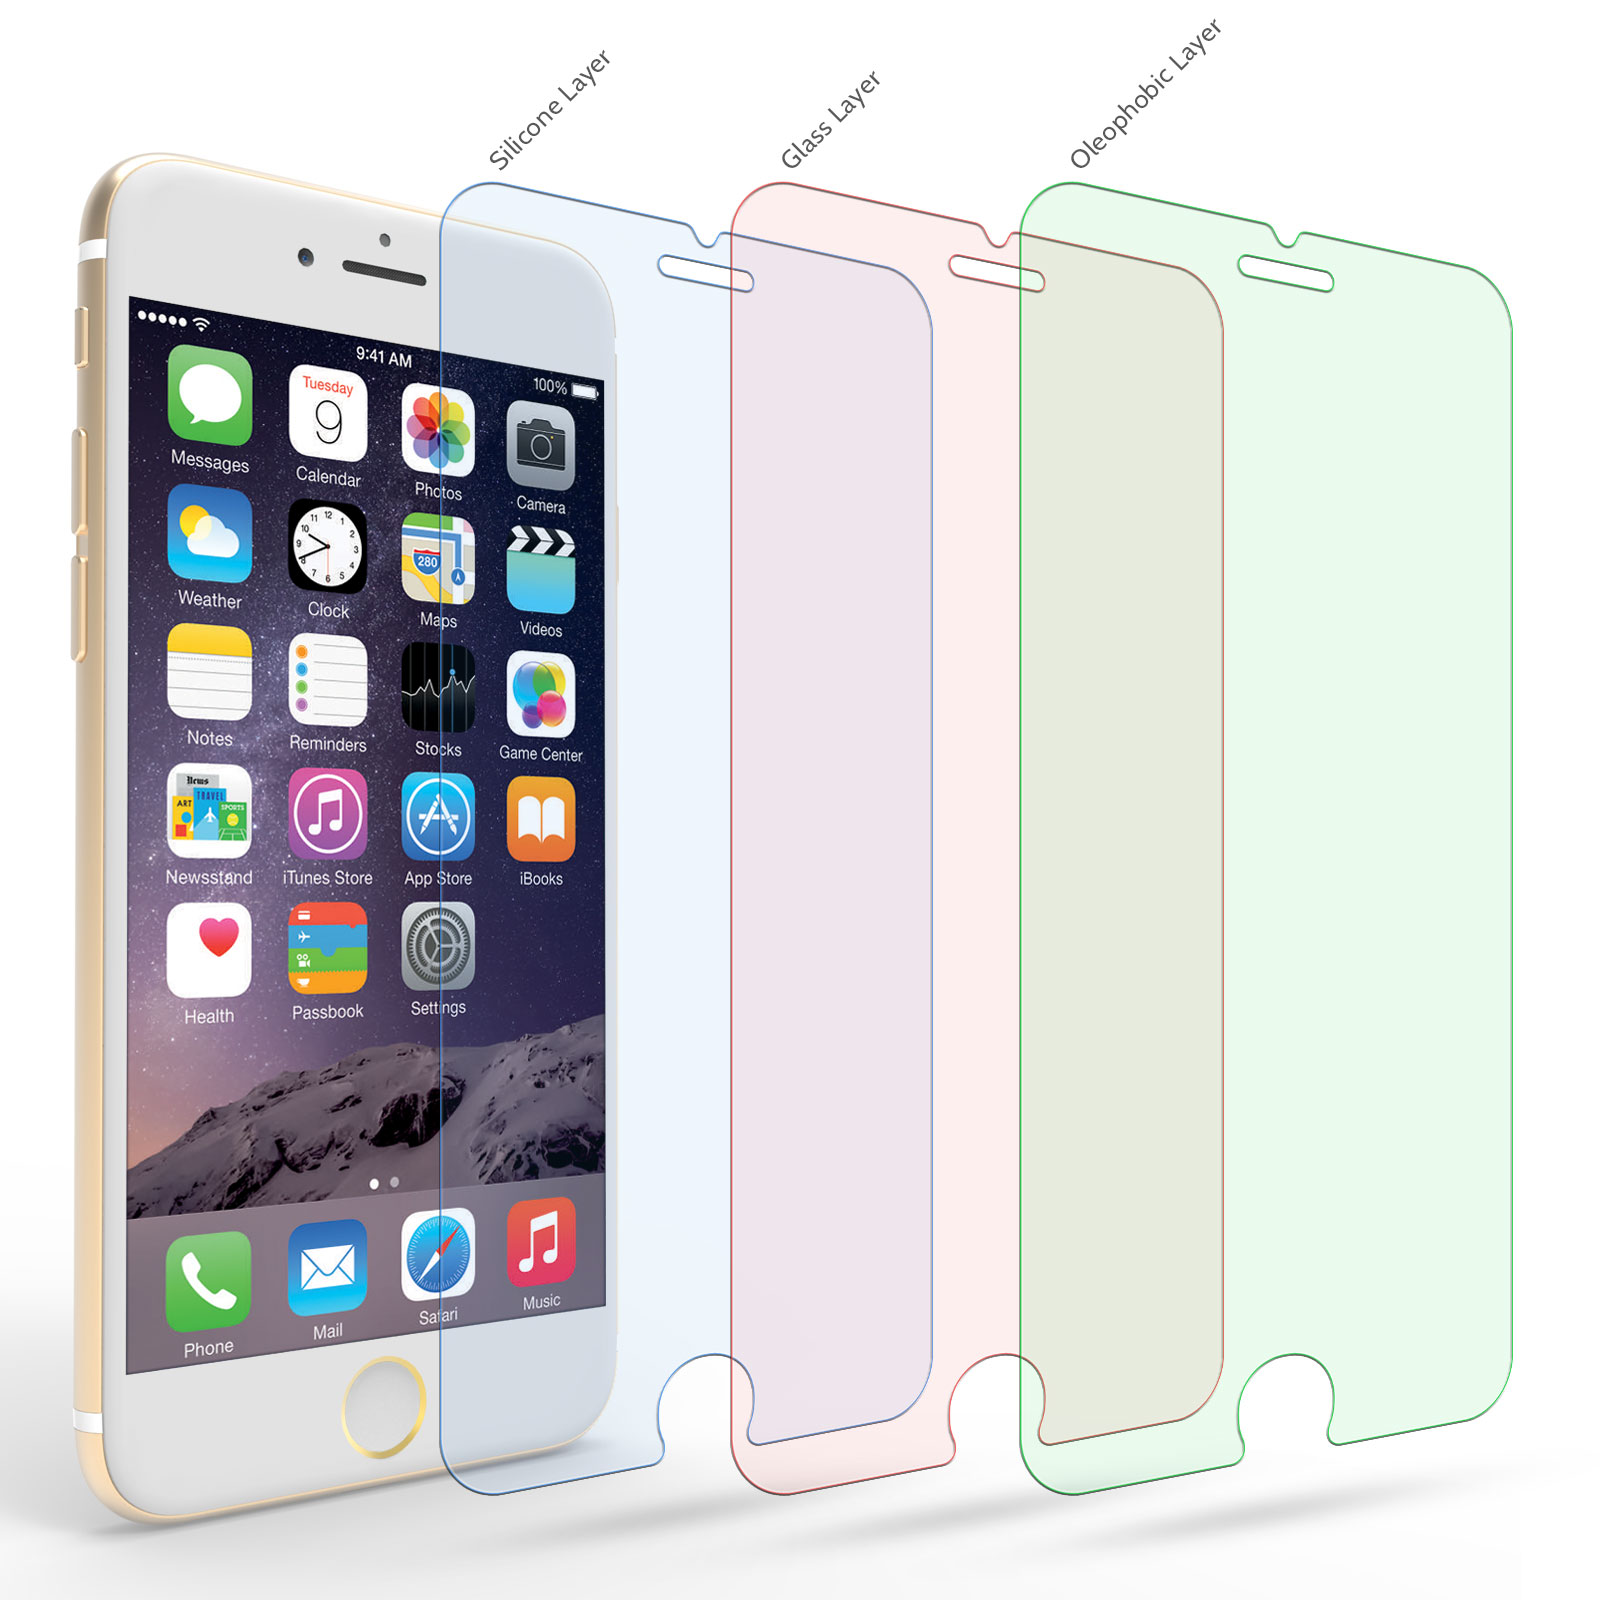 Yousave Accessories iPhone 6 / 6s Plus Glass Screen Protector - Twin Pack